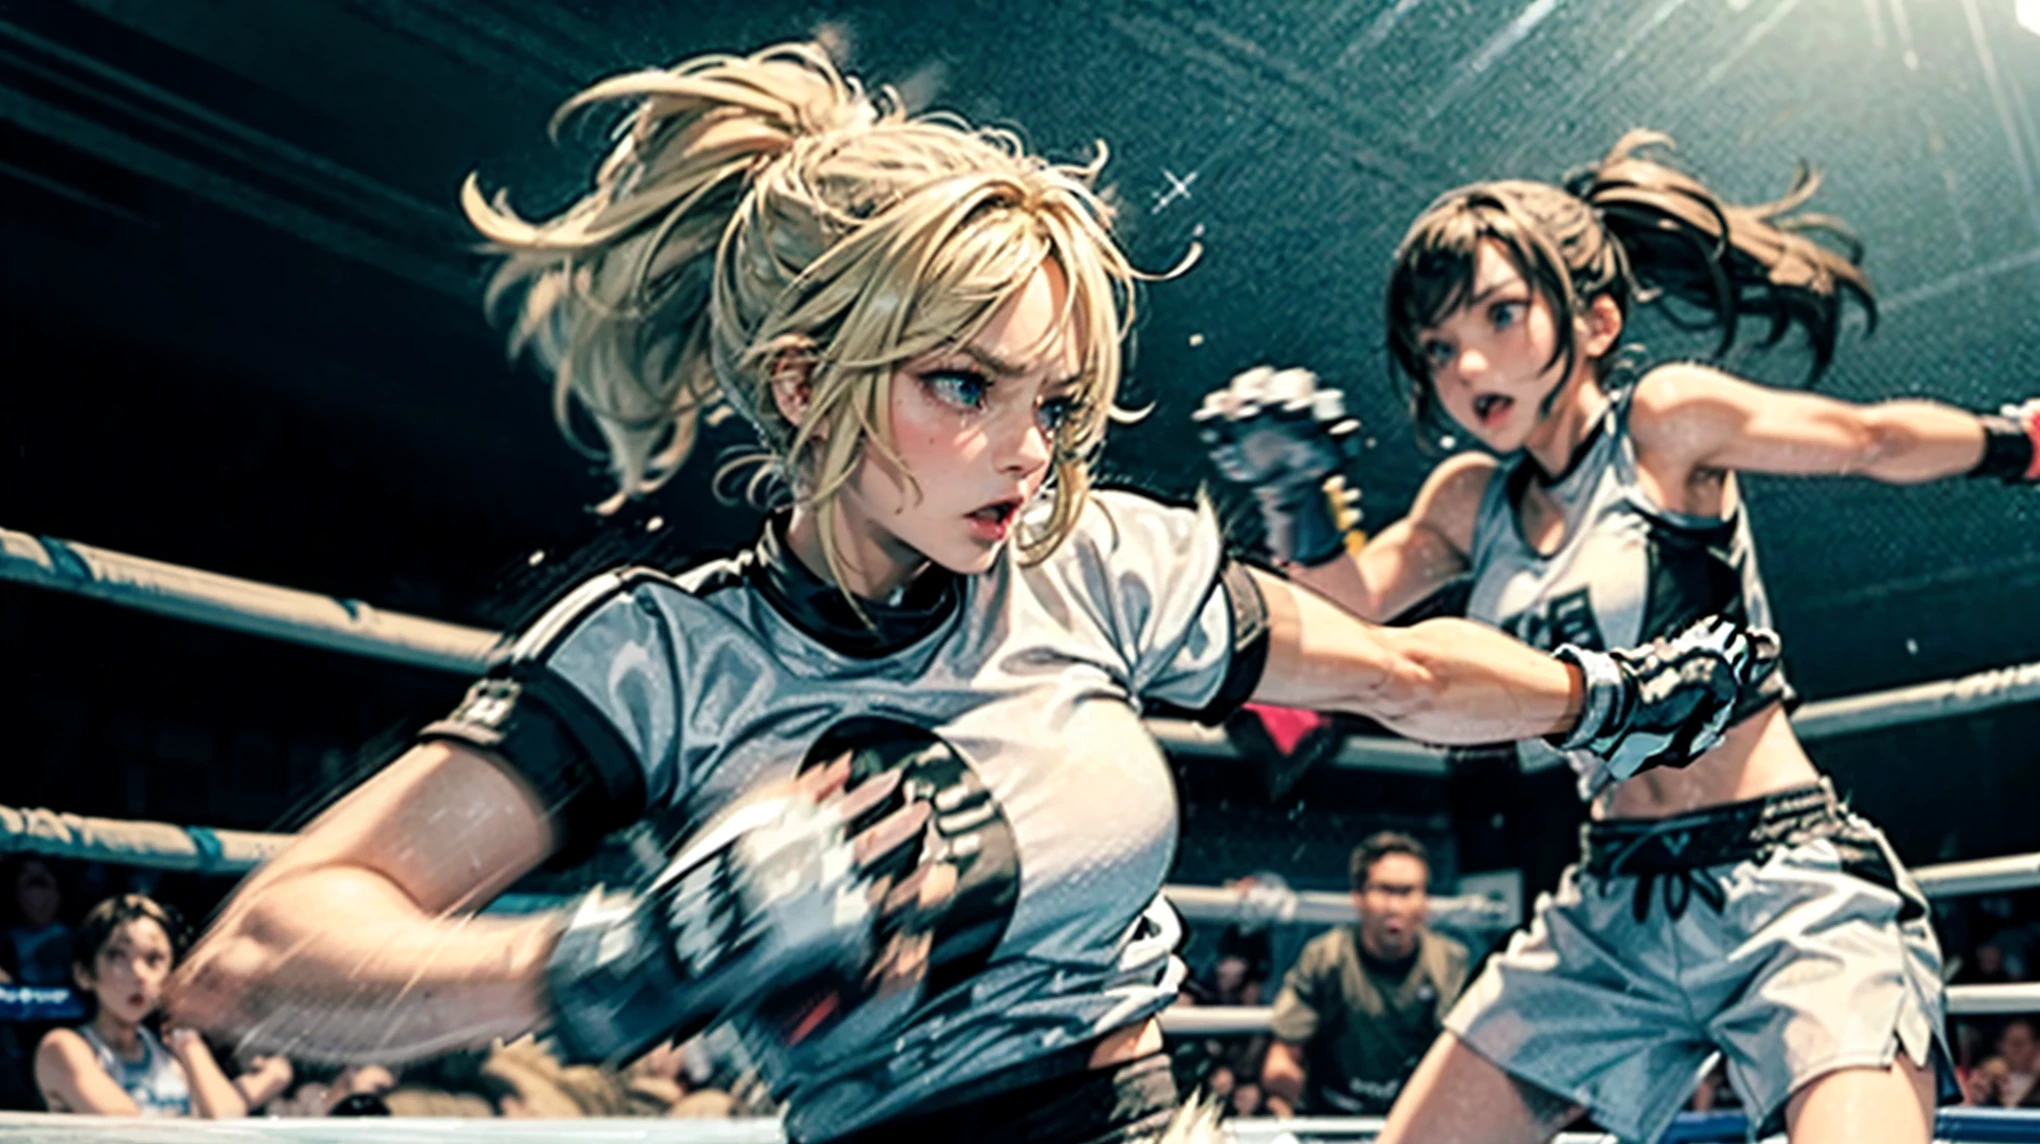 Highly detailed CG unit 8K wallpaper, masterpiece, High resolution, highest quality, highest quality real texture skin,surreal, Digital Painting,Increase the resolution,RAW photos highest quality,Very detailed,wallpaper,two Teen women,two Teen women are hard pancing each other at boxing fight,2Women,Teen,cute,cute,Hair is floating,Messy Hair,Blonde and brunette,Messy Hair,Ponytail and short hair,Skin color is white,Eye color is blue or black,Shining Eyes,Big eyes,chest,Sportswear,Angry face,Punching each other,(Boxing gloves),(Dynamic pose:1.2),(Dynamic Angle:1.4),Sweat, BREAK ,(Gloves motion blur:1.8),Boxing Ring,1 boxing referee,audience,(Be sure to draw the hand accurately),[Browsing Caution:2.0],